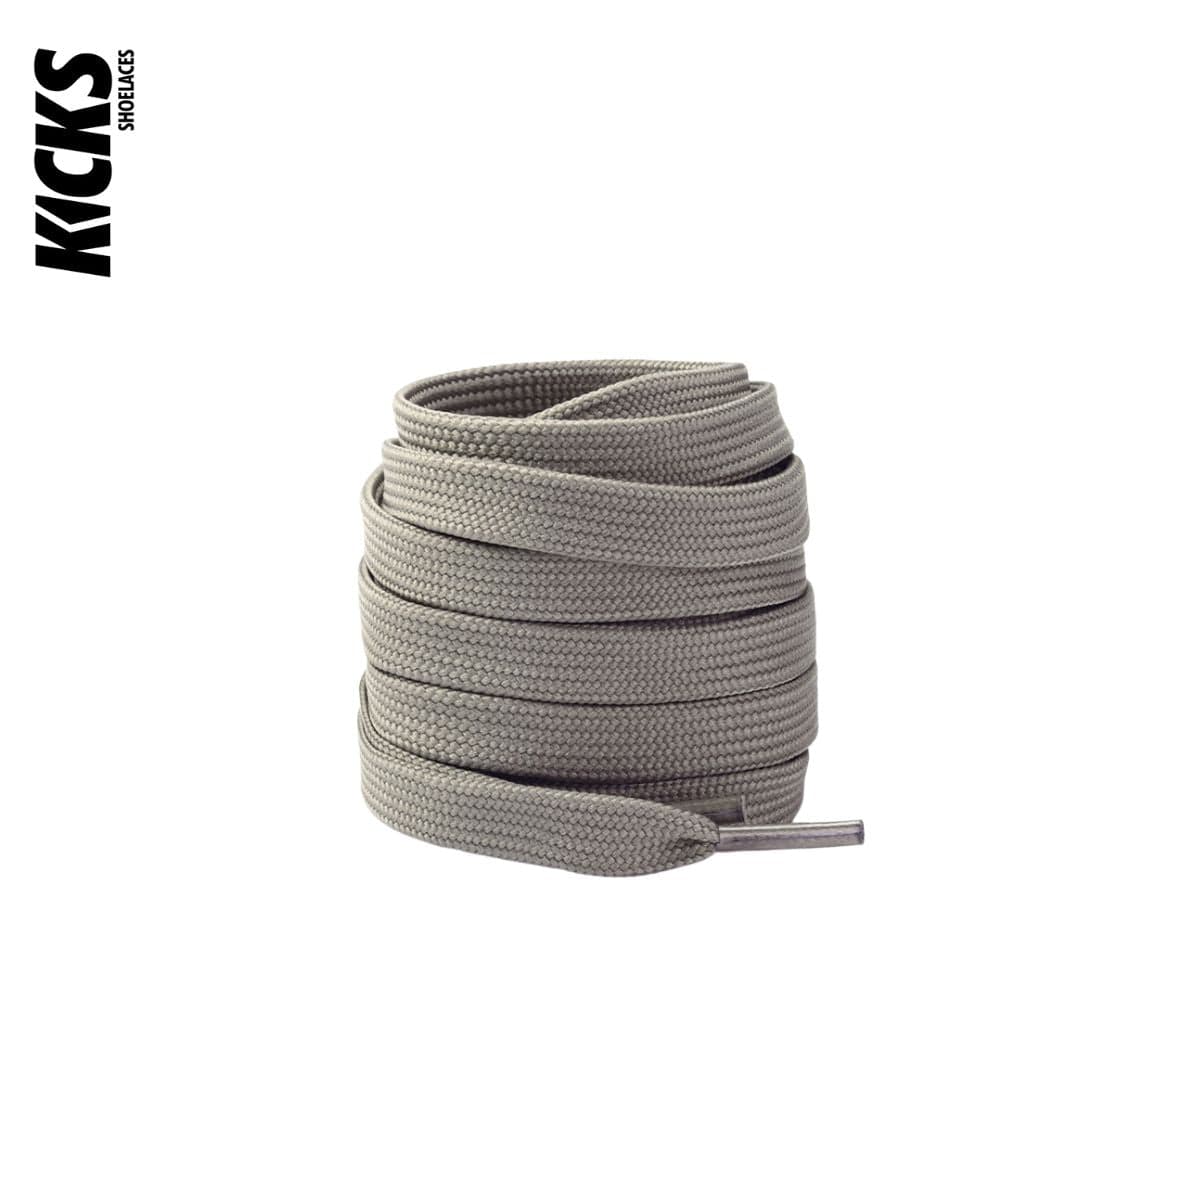 Bone Replacement Laces for Adidas EQT Sneakers by Kicks Shoelaces